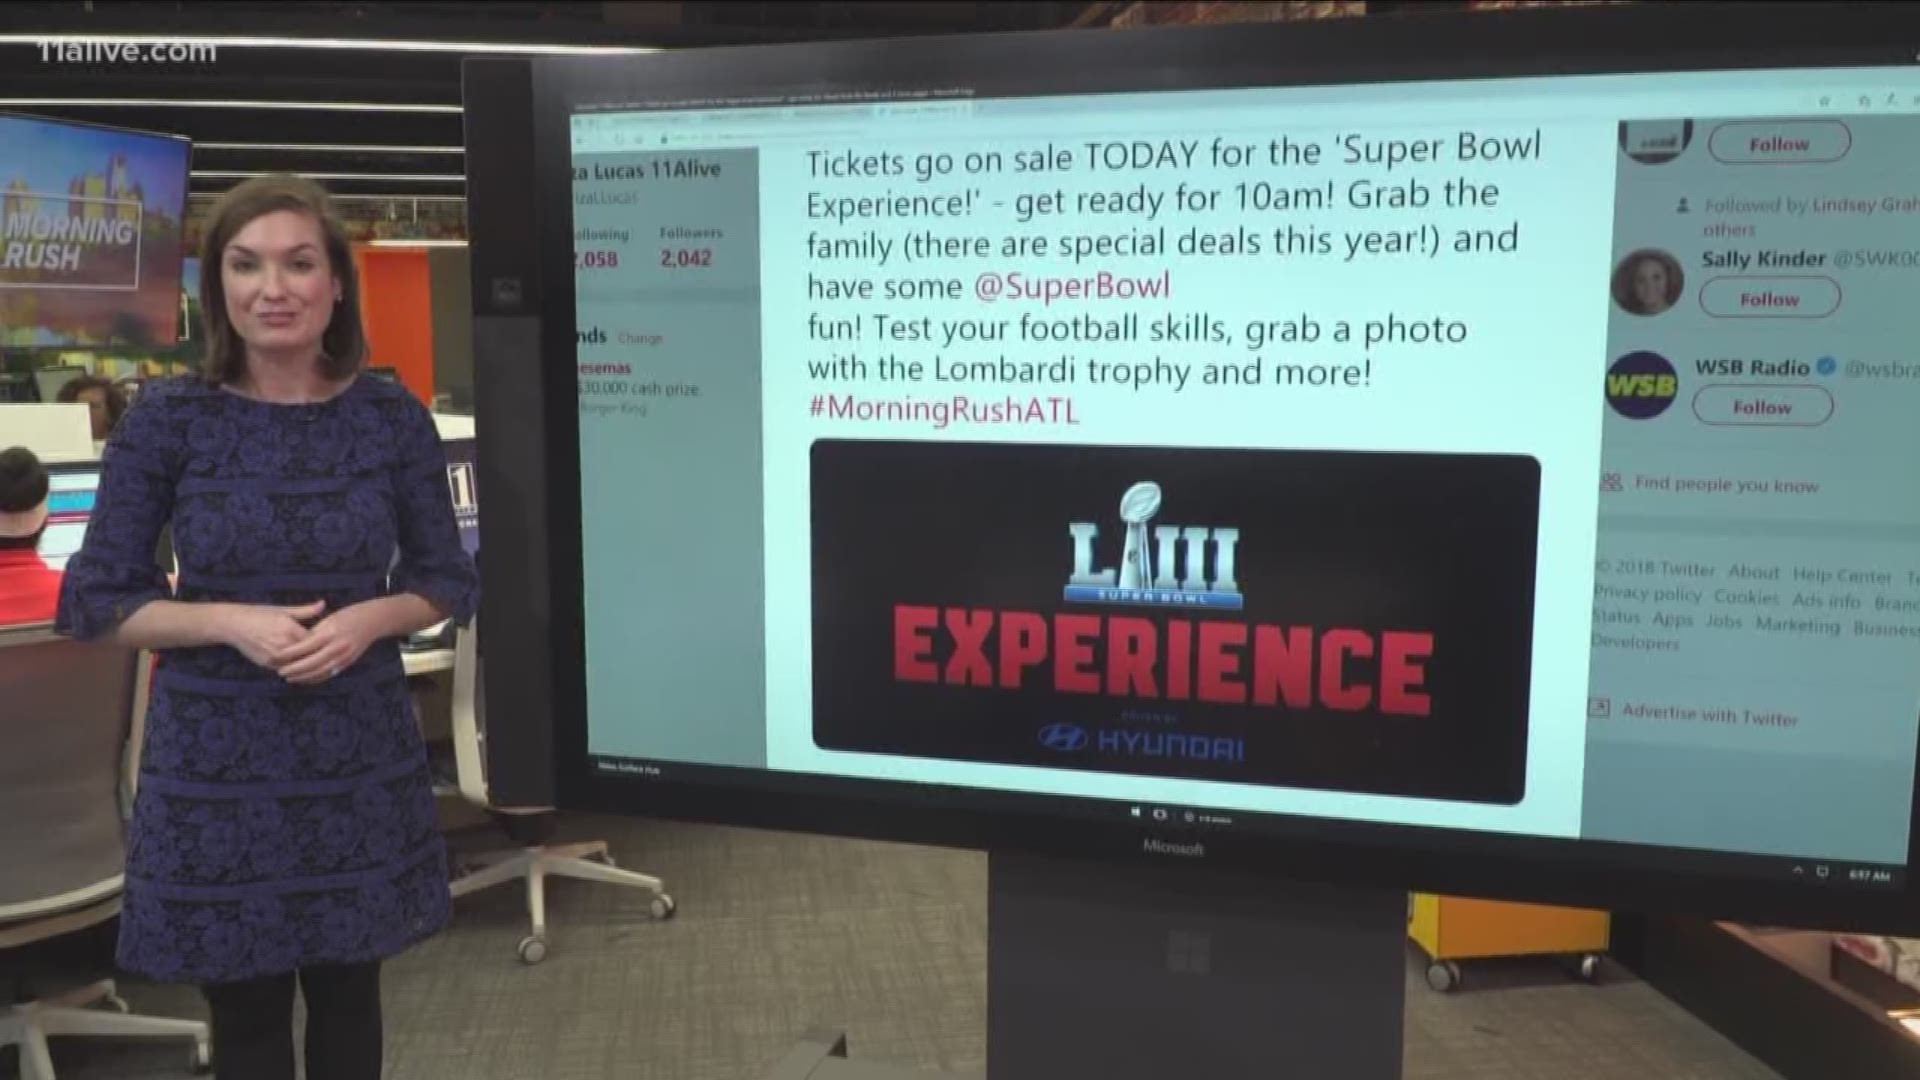 Super Bowl Experience is coming to Atlanta for an interactive fan experience.